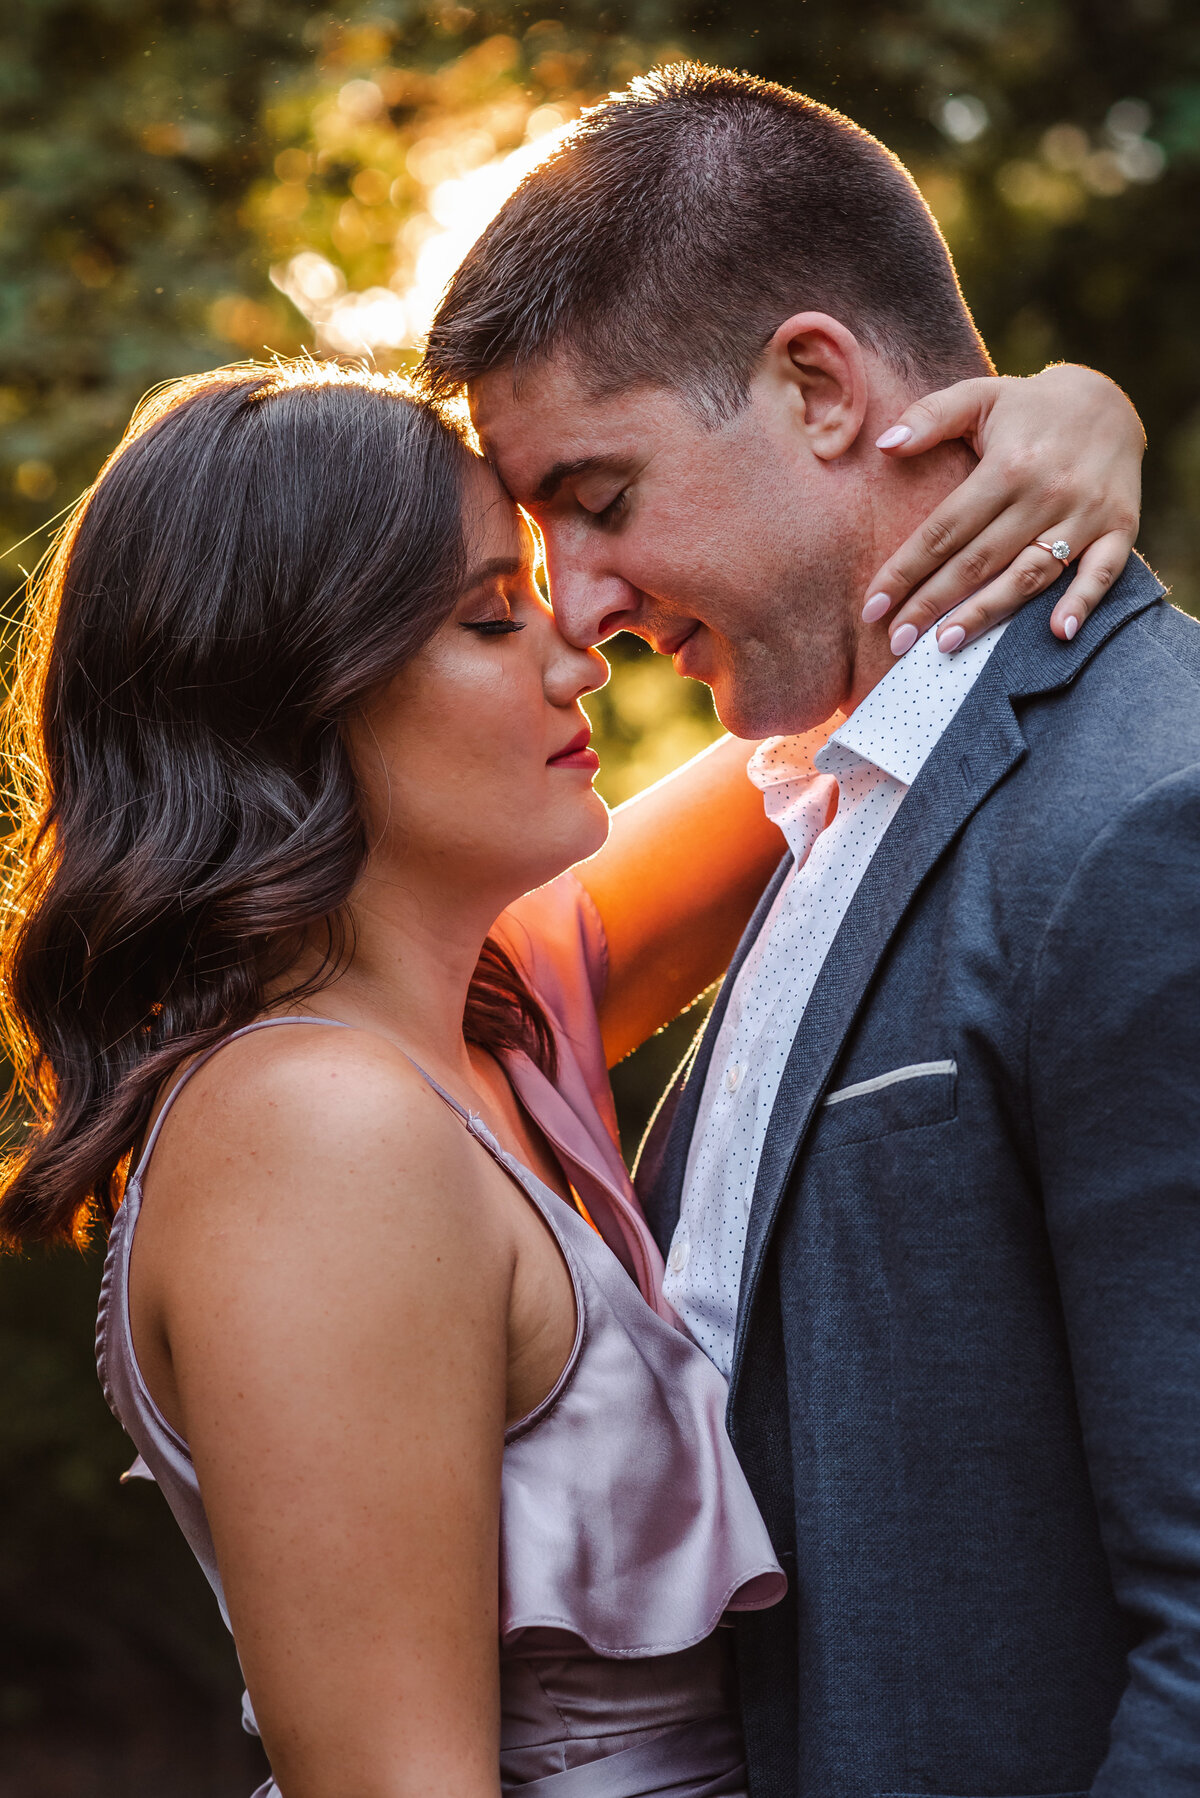 creative-golden-hour-engagement-photos-by-suess-moments-photographer-nj